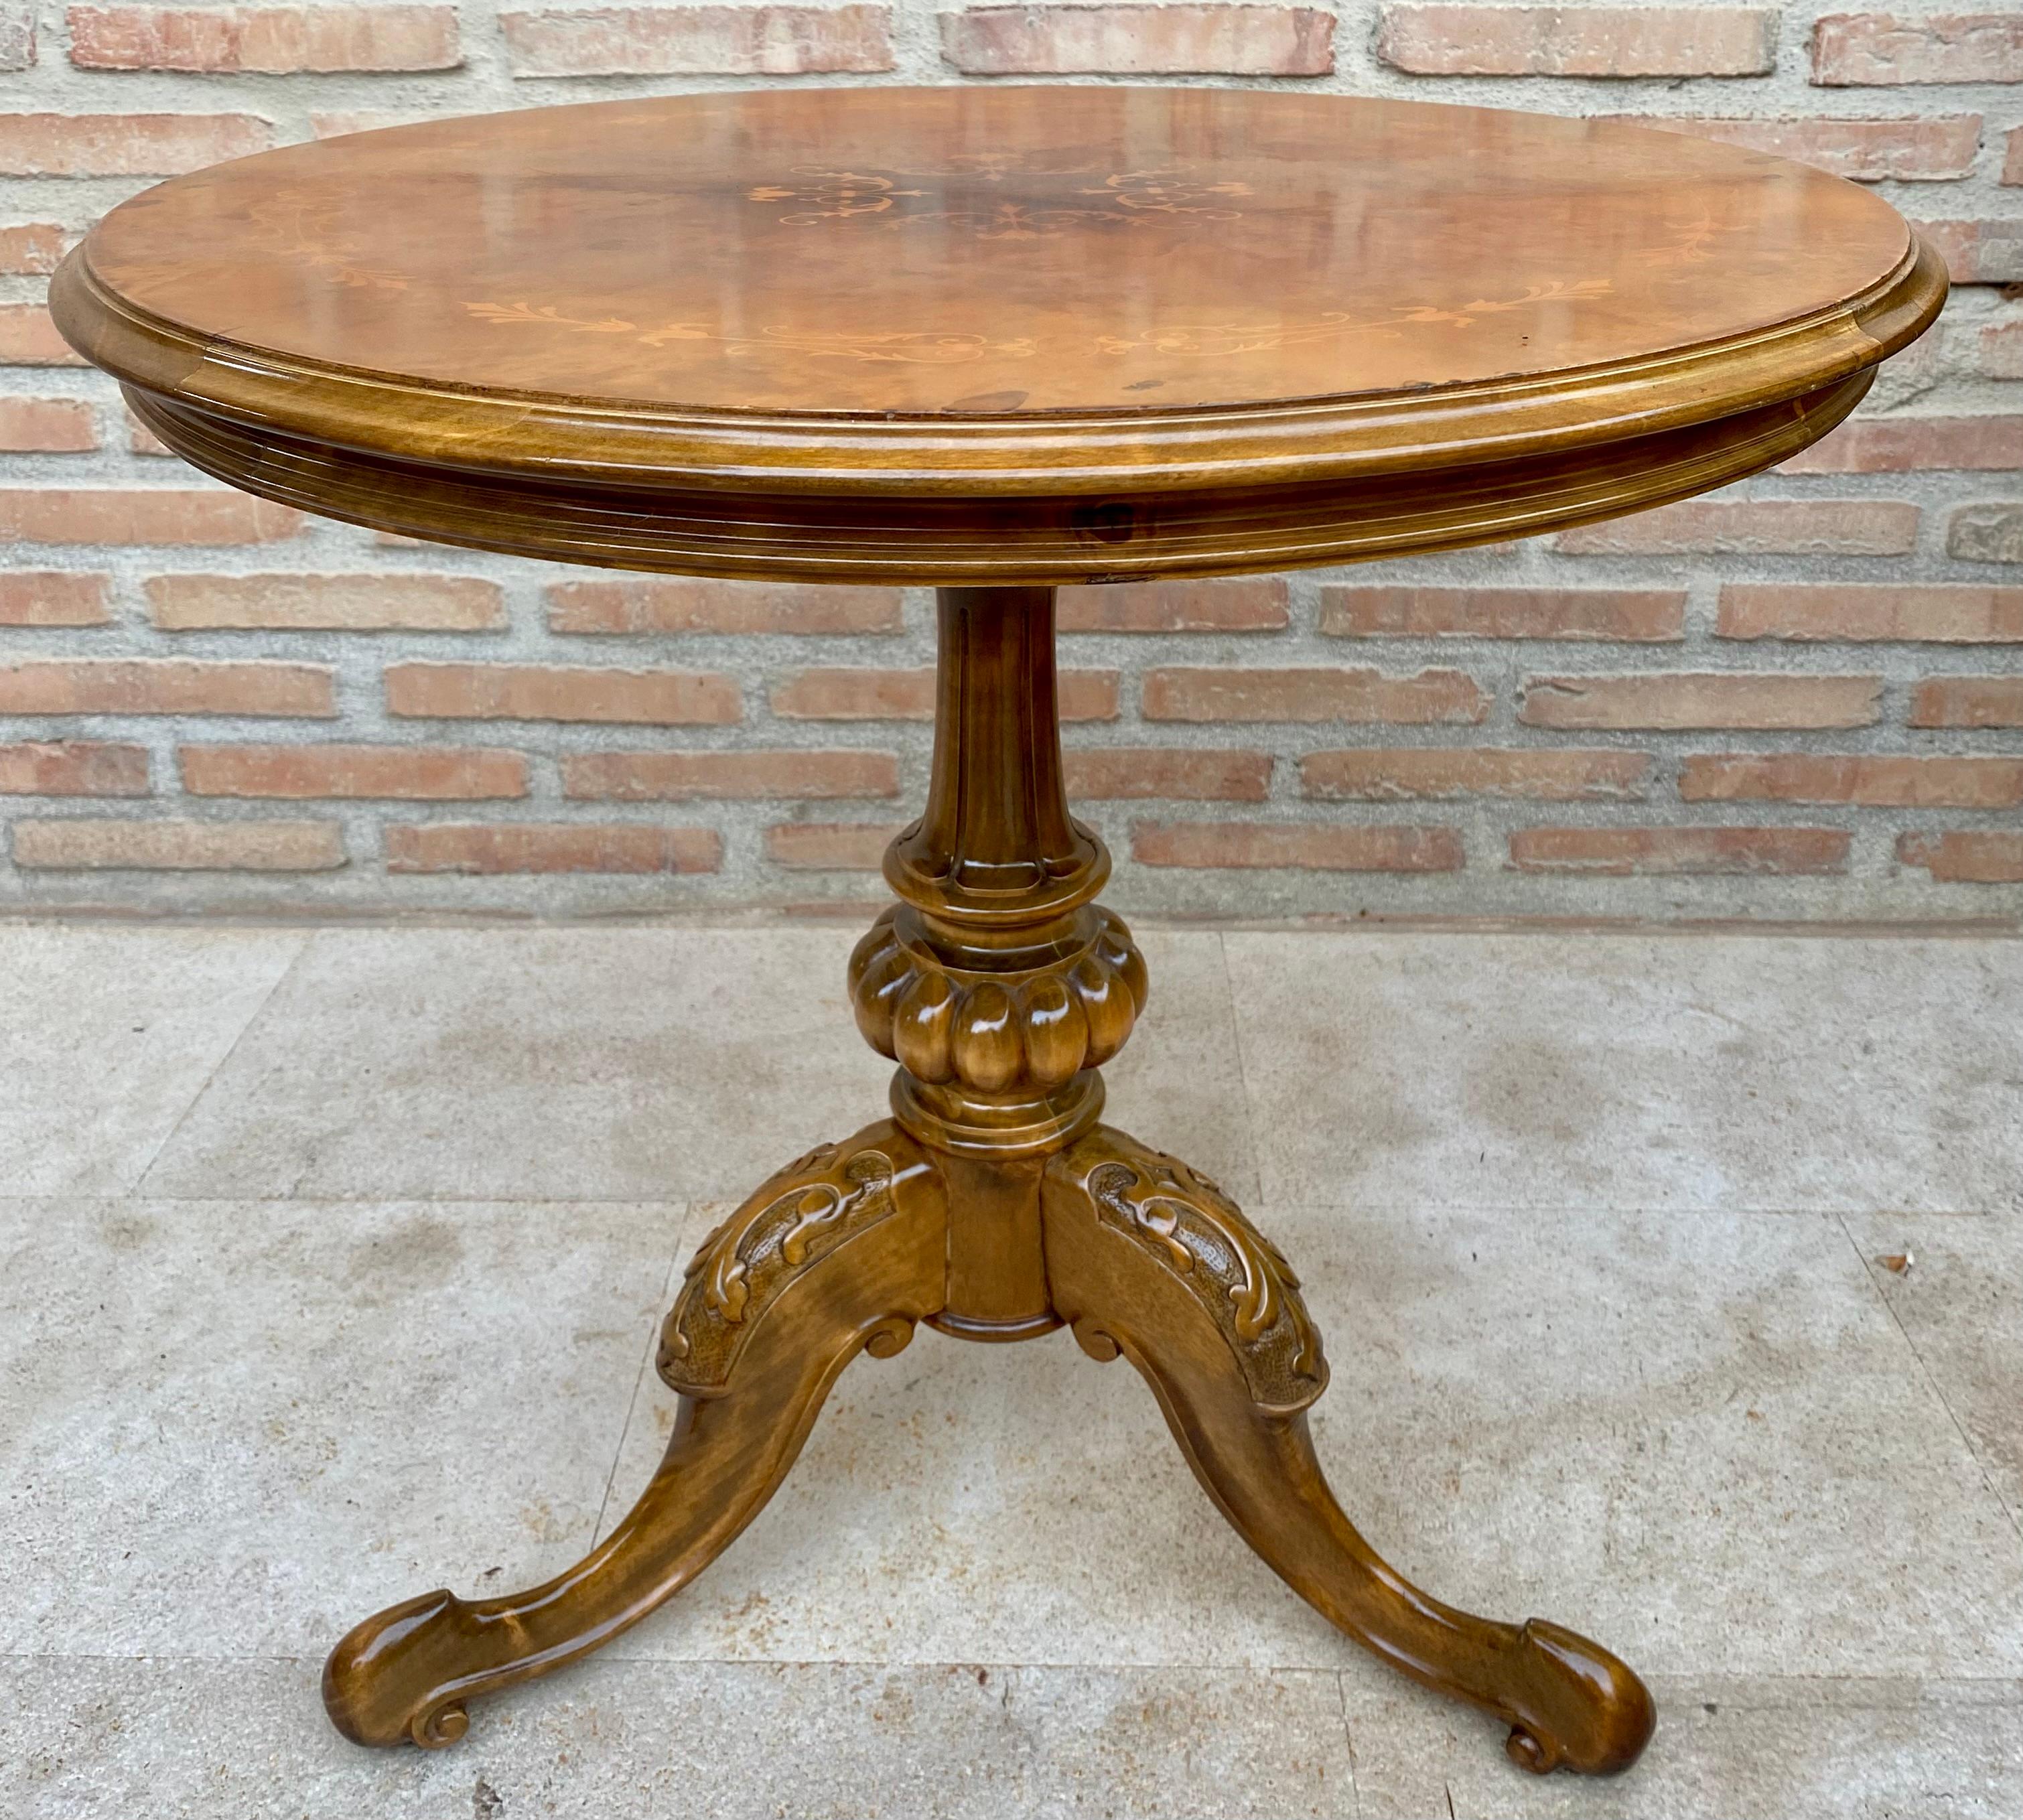 Neoclassical English Round Pedestal Table with Marquetry Décor and Tripod Base, 1890s For Sale